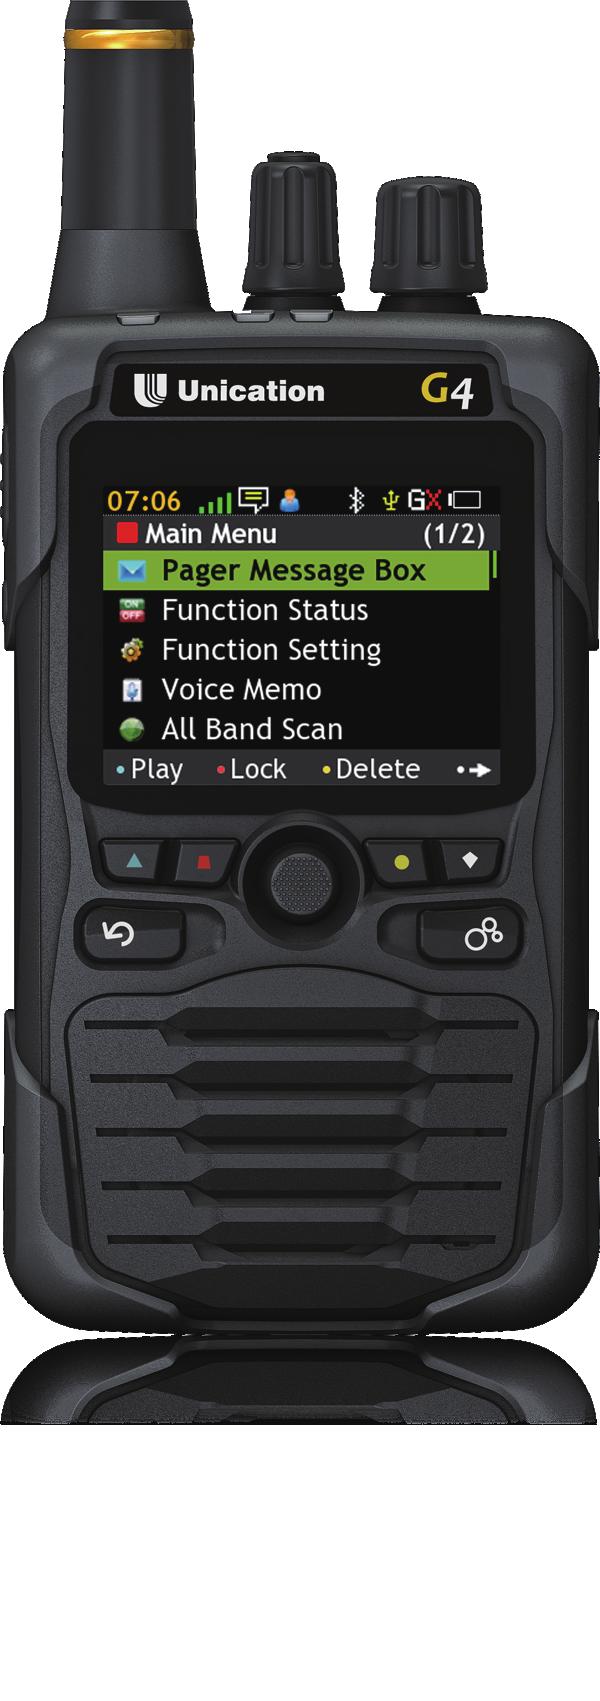 Any Time, Anywhere Unication is committed to Provide You the Best Solution G4 Voice Pager